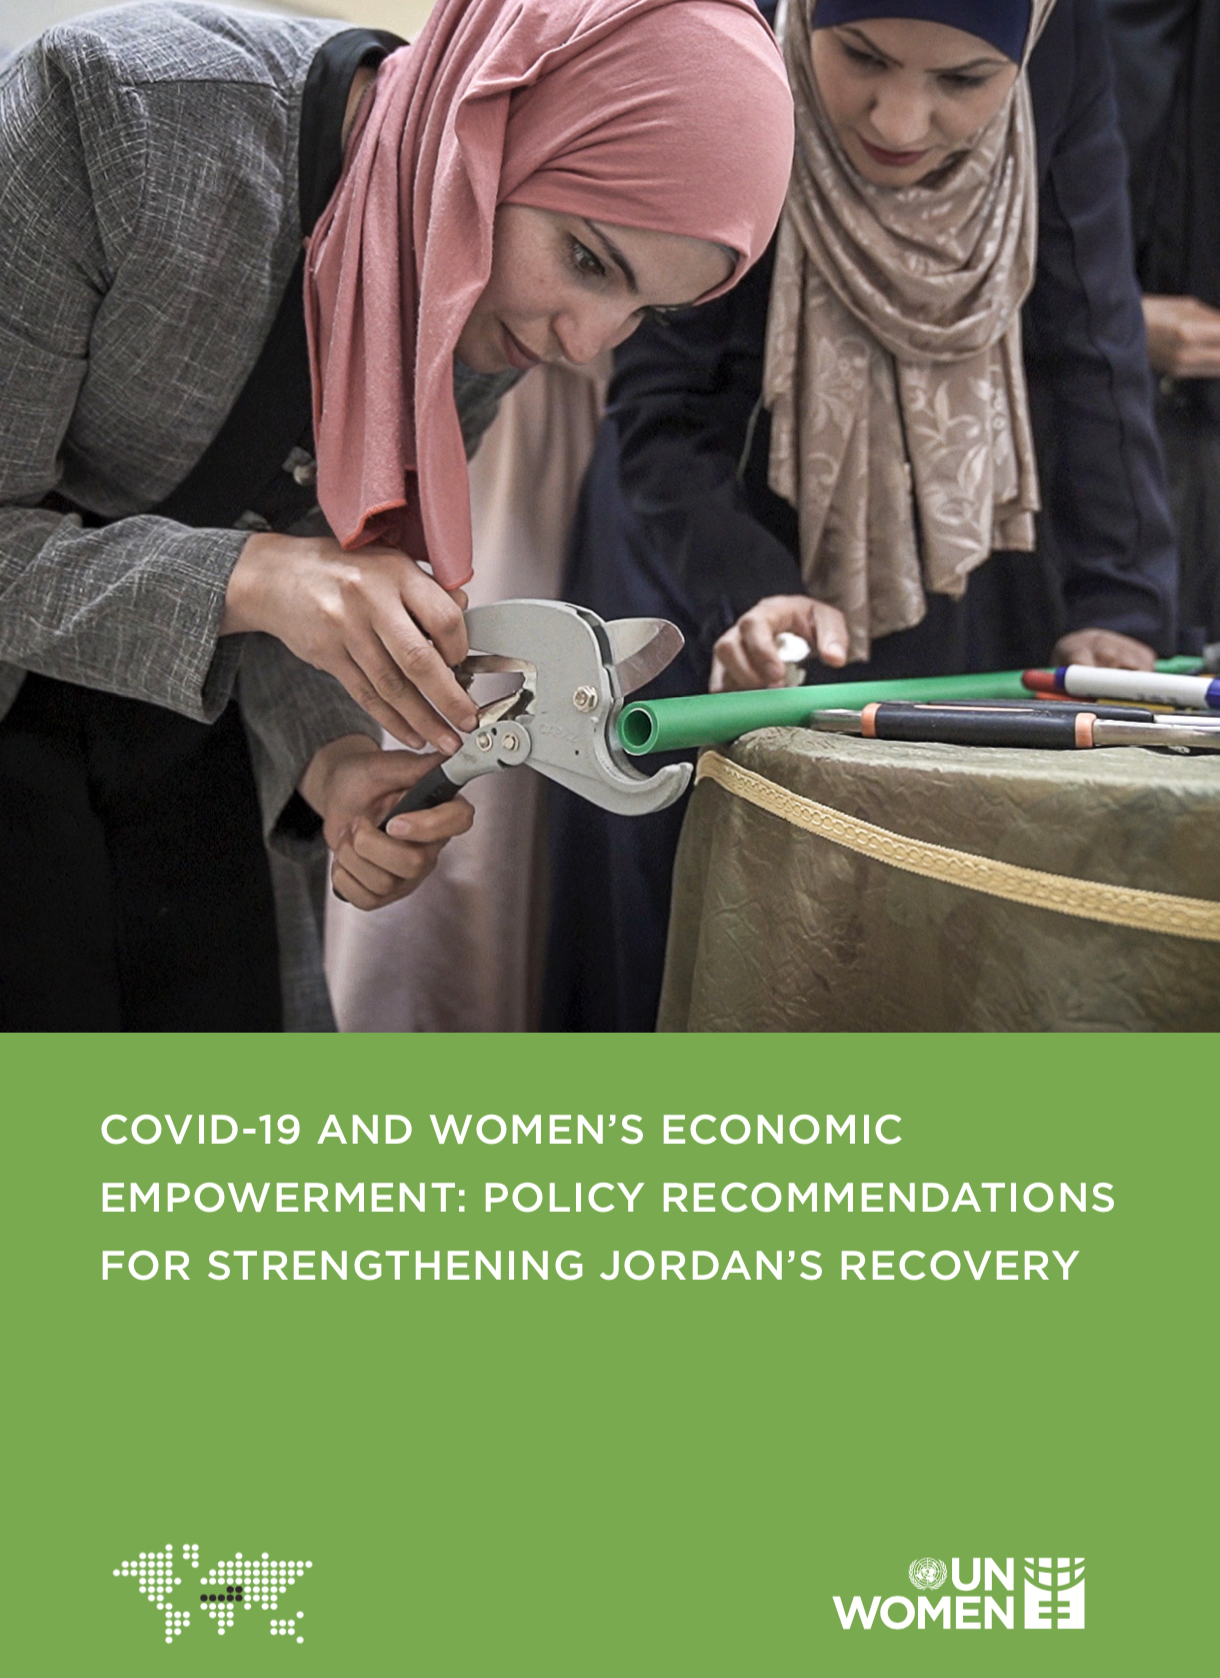 COVID-19 AND WOMEN’S ECONOMIC EMPOWERMENT: POLICY RECOMMENDATIONS FOR STRENGTHENING JORDAN’S RECOVERY, Research Paper, UN Women. 